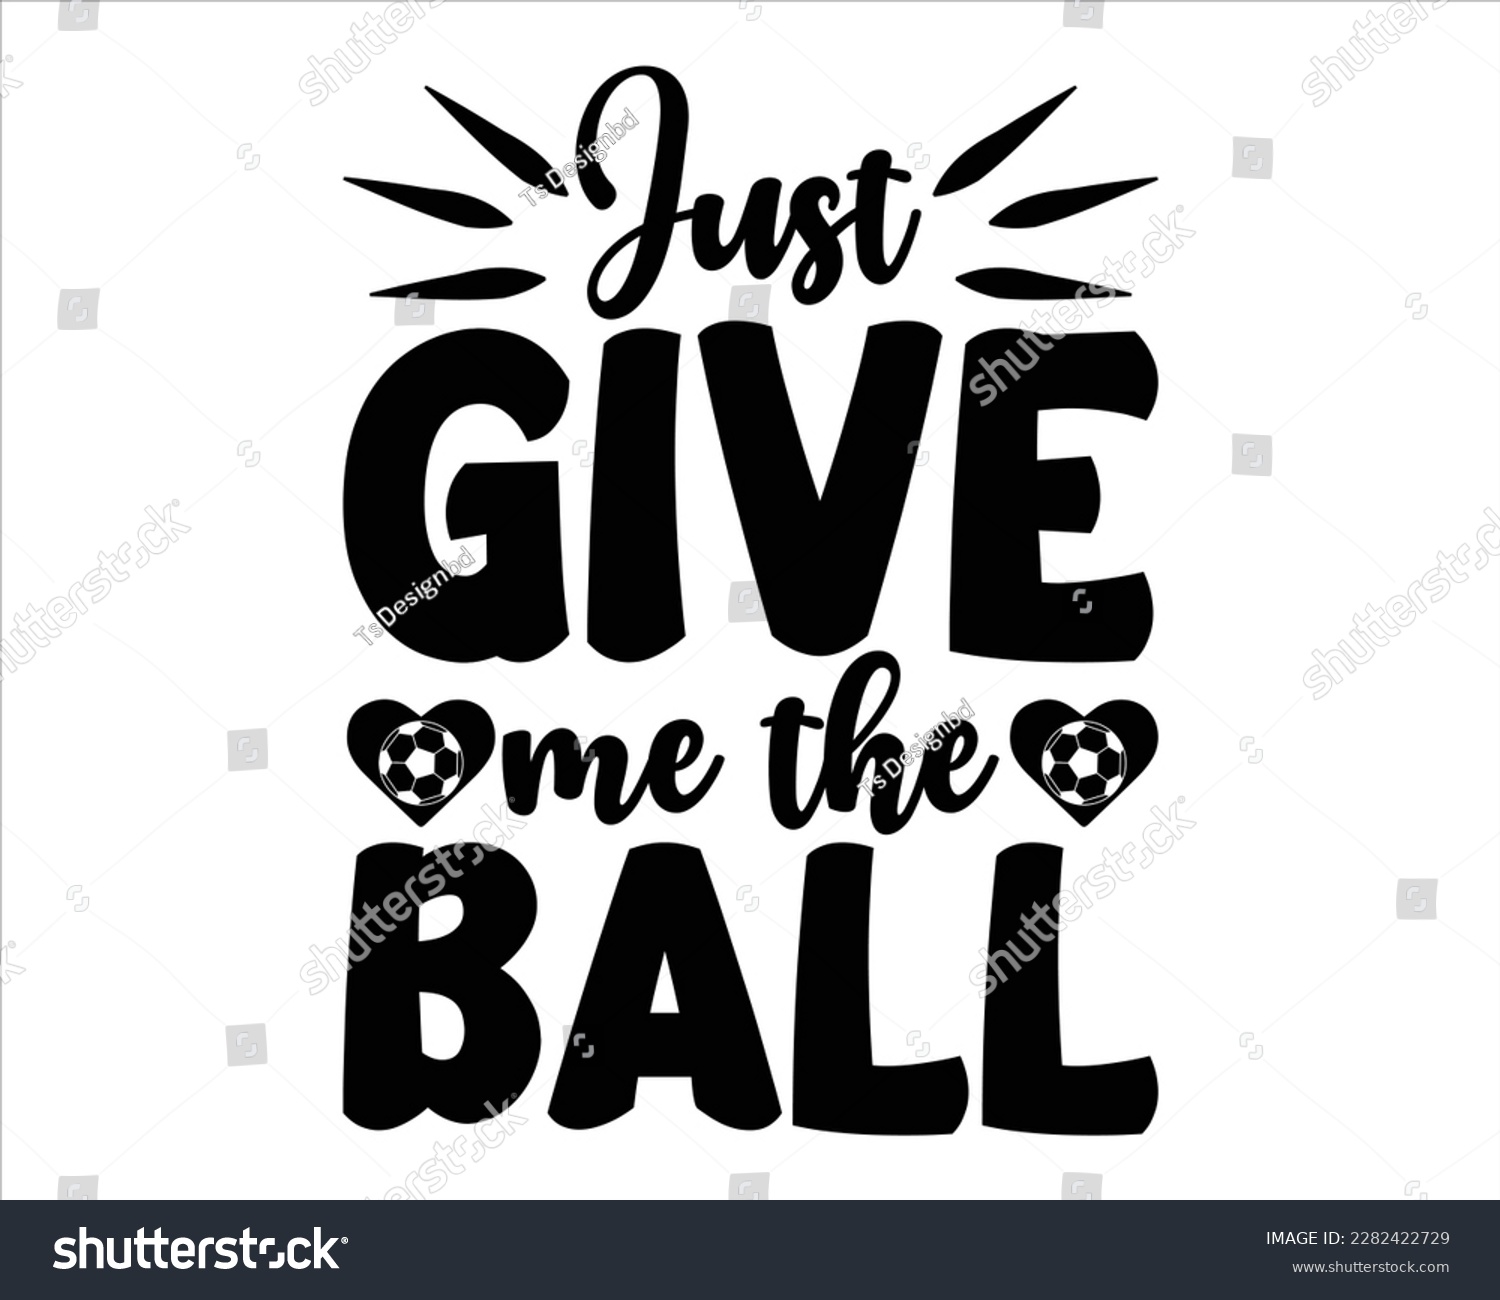 SVG of Just give Me The Ball Svg Design,Soccer Mom Svg,Soccer Mom Life Svg,FootBall Svg,Soccer Ball Svg,Soccer Clipart,Sports,Game Day Svg,Soccer Quote Svg, Soccer Saying Svg svg